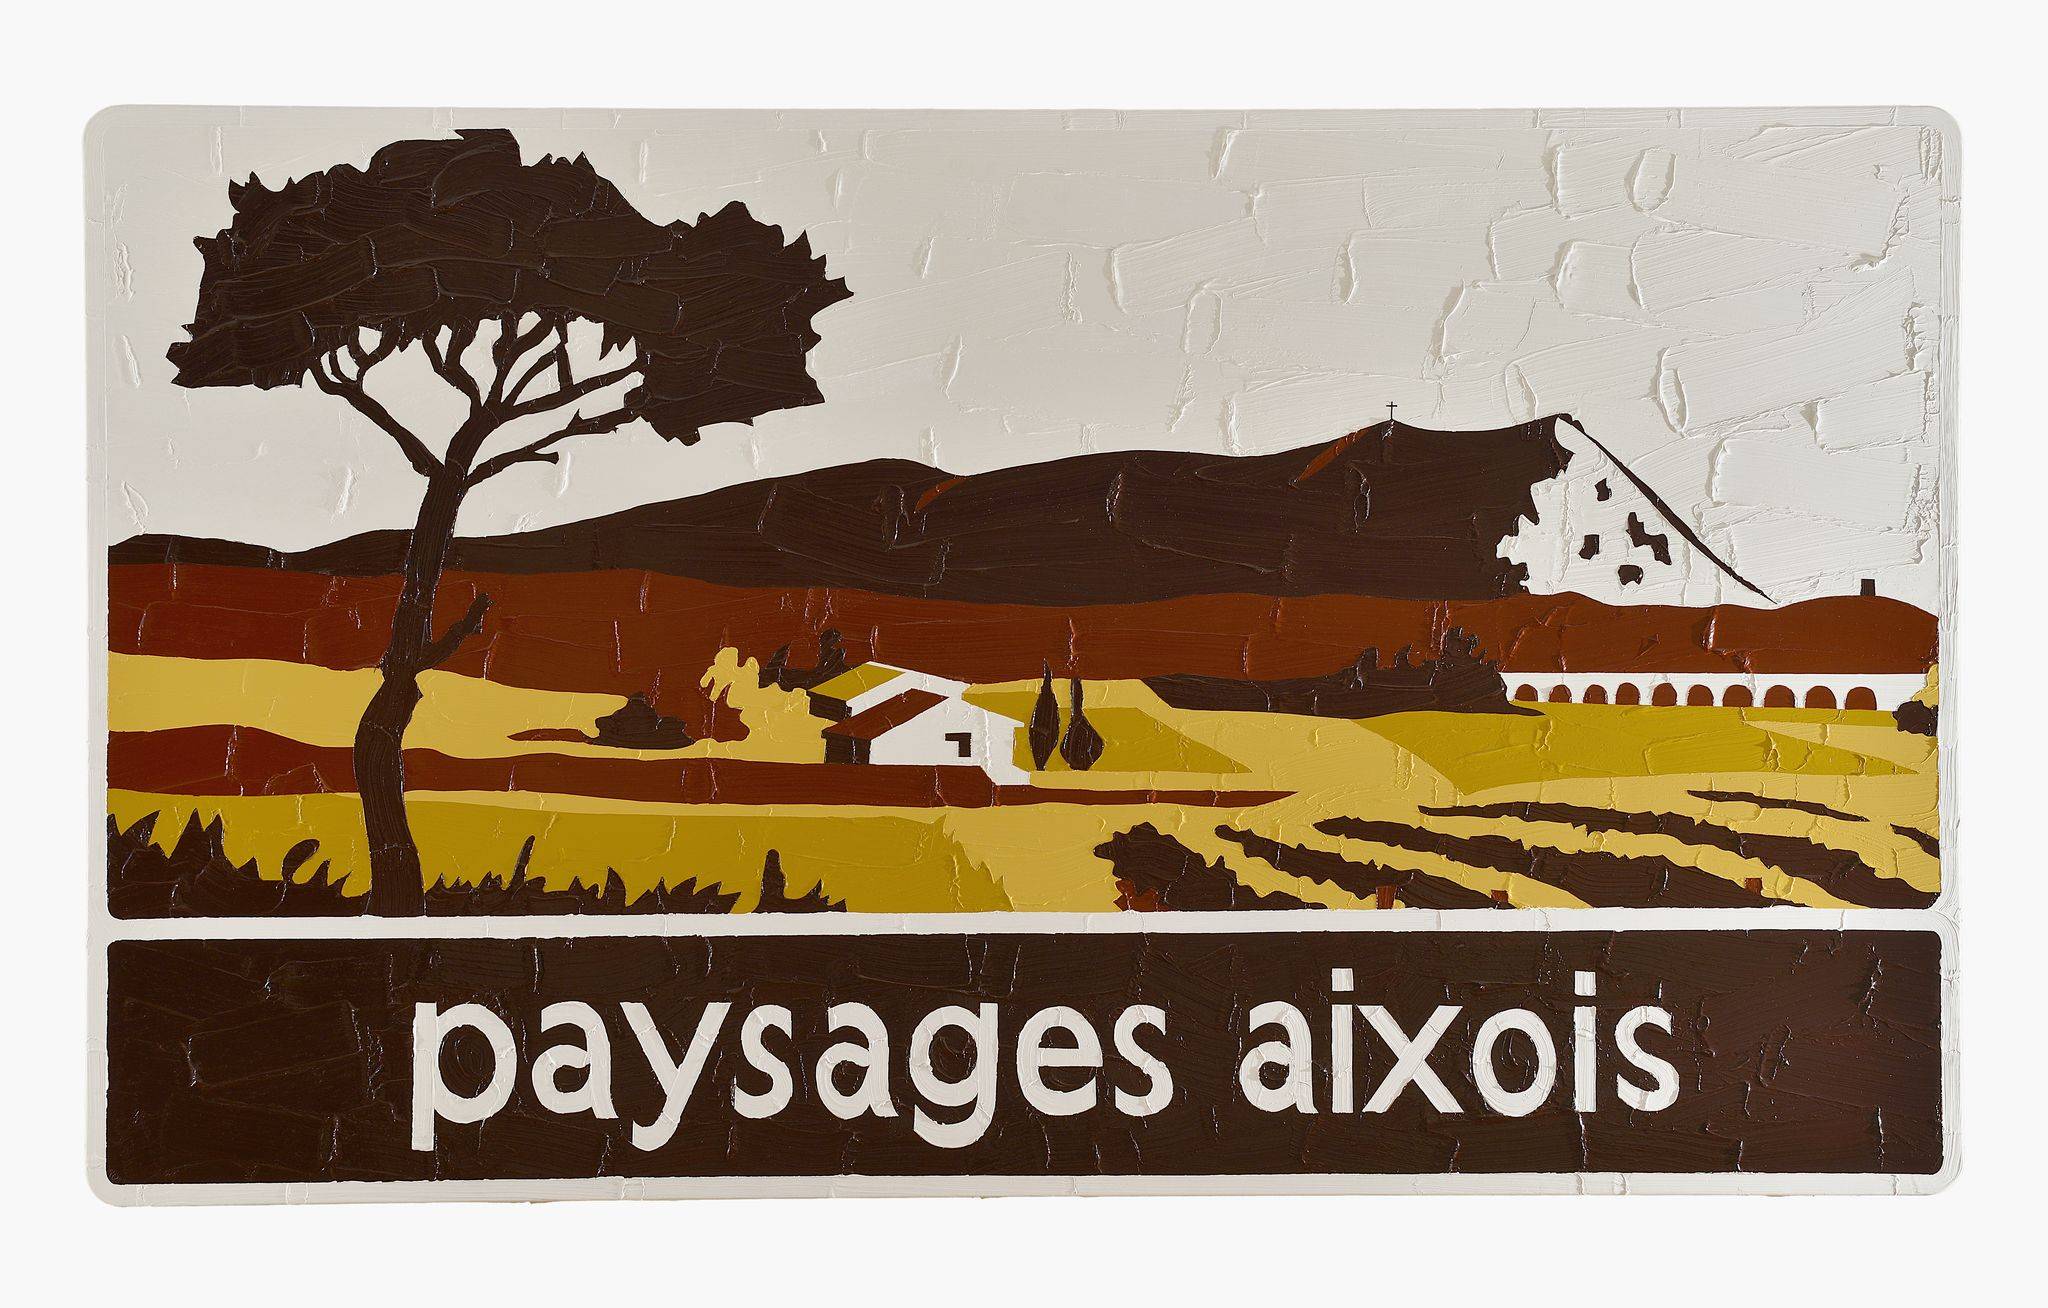 Bertrand Lavier. Paysages aixois, 2015. Acrylic on traffic sign. 140 x 240 cm - 55 1/8 x 94 1/2 inches © Bertrand Lavier. Courtesy of the Artist and Almine Rech Gallery. Photo: Hervé Hote